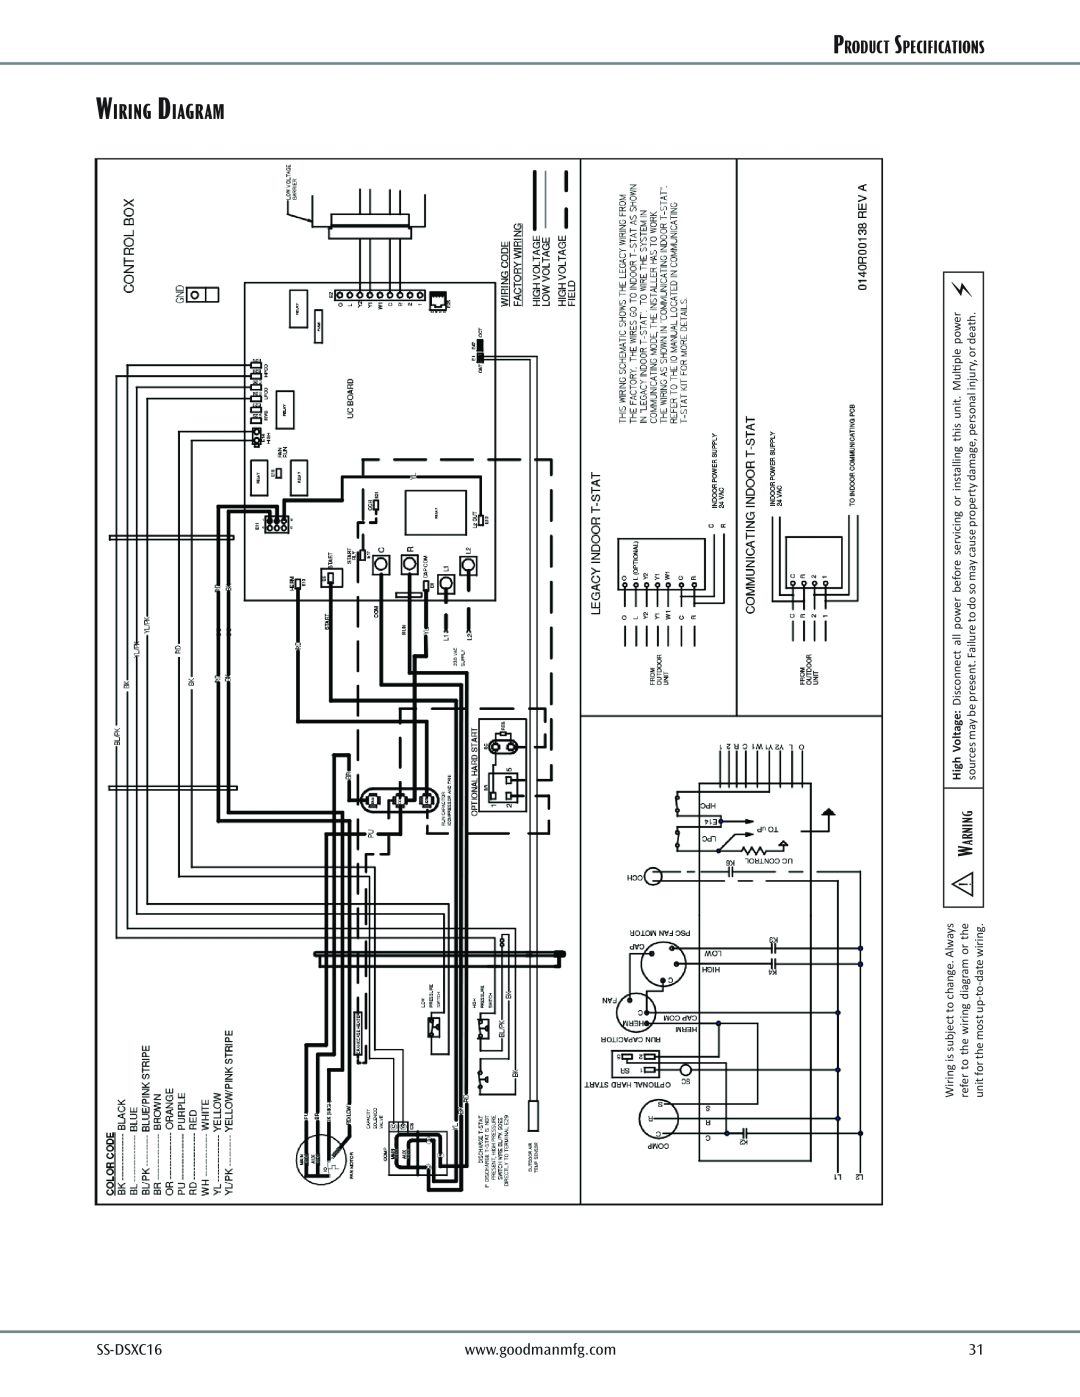 Goodman Mfg DSXC16 dimensions Wiring Diagram, Product Specifications 